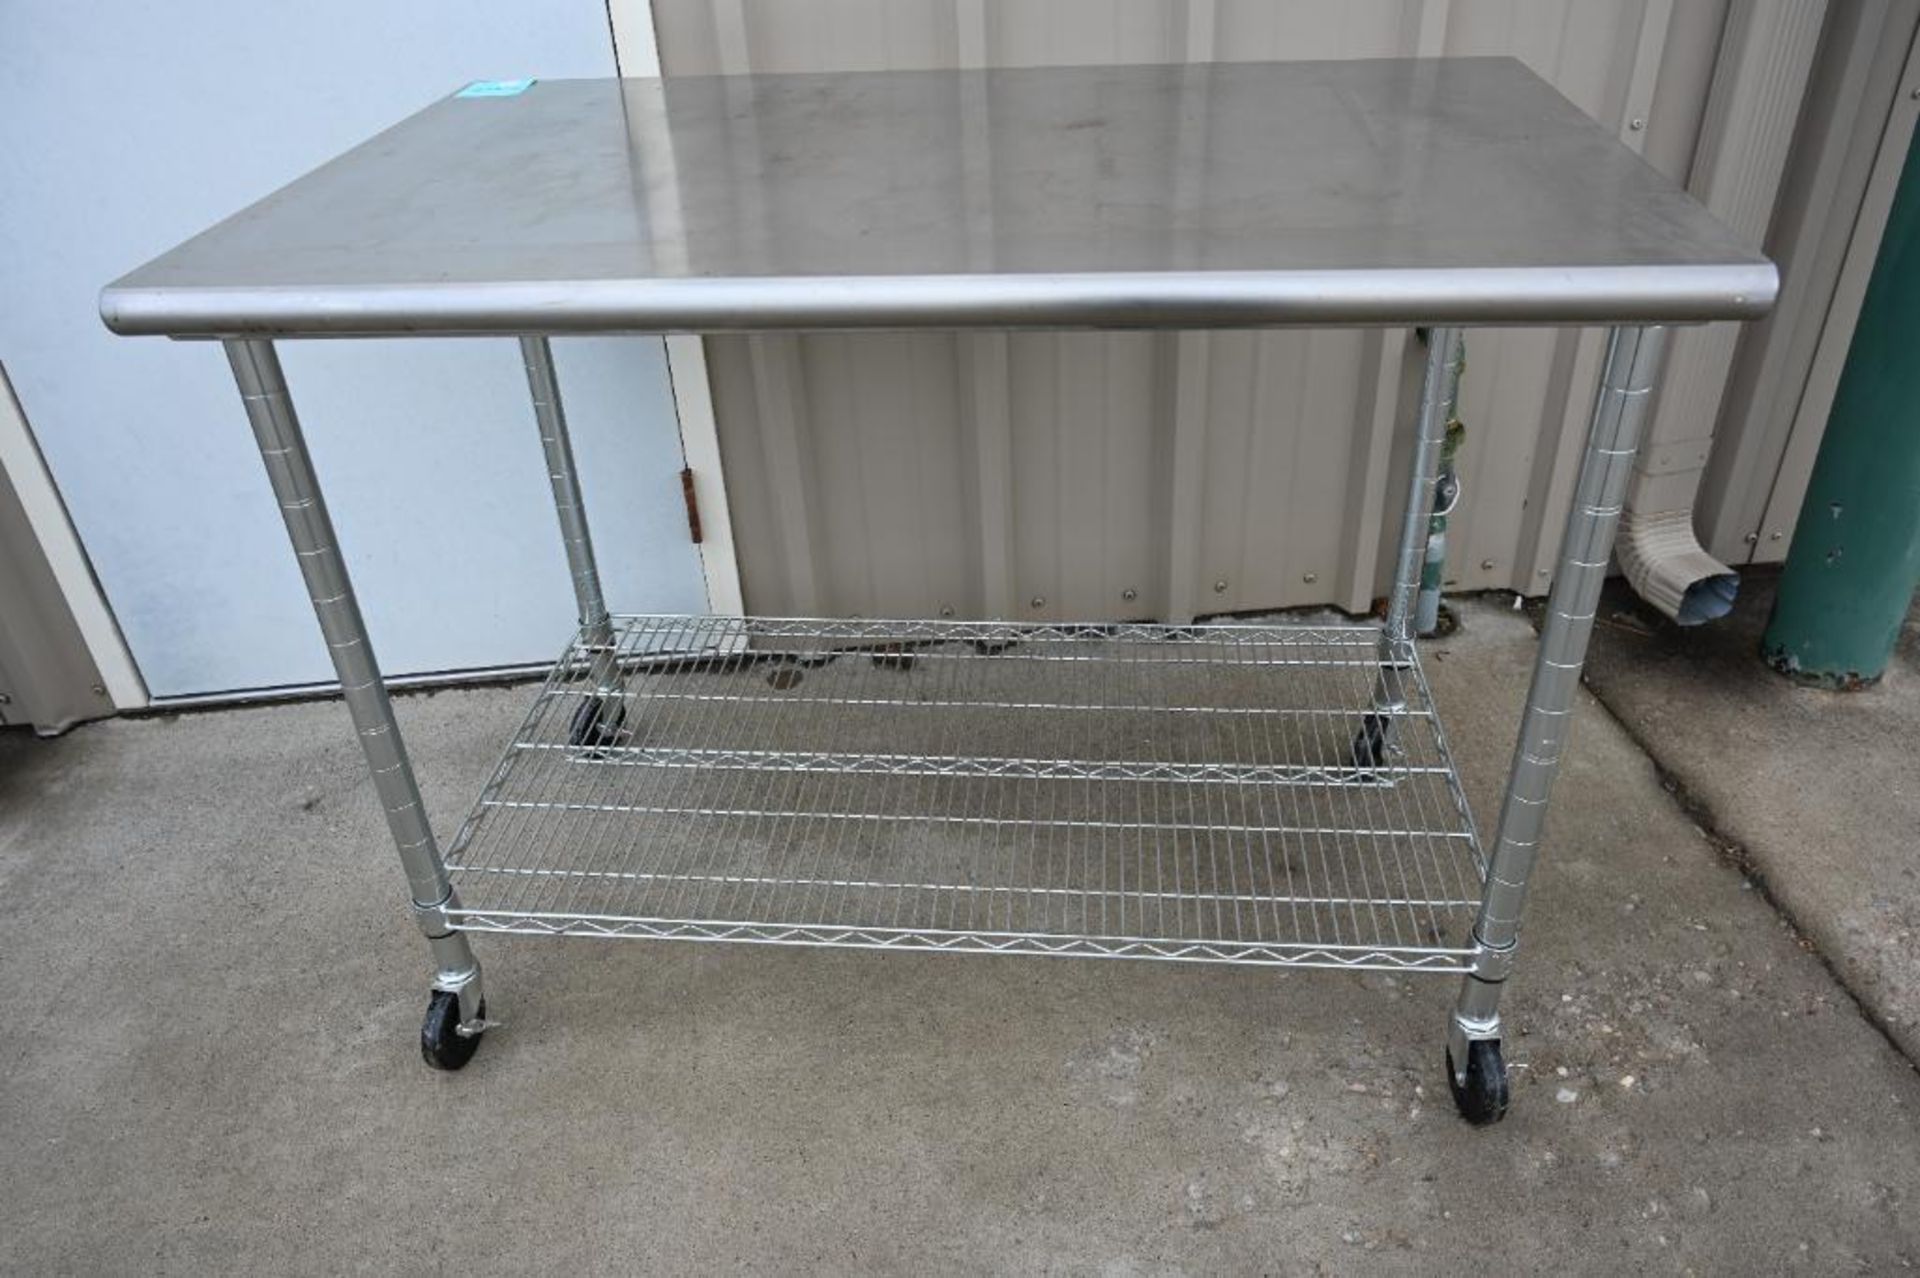 NSF 48" Stainless Steel Work Table with Casters - Image 9 of 10